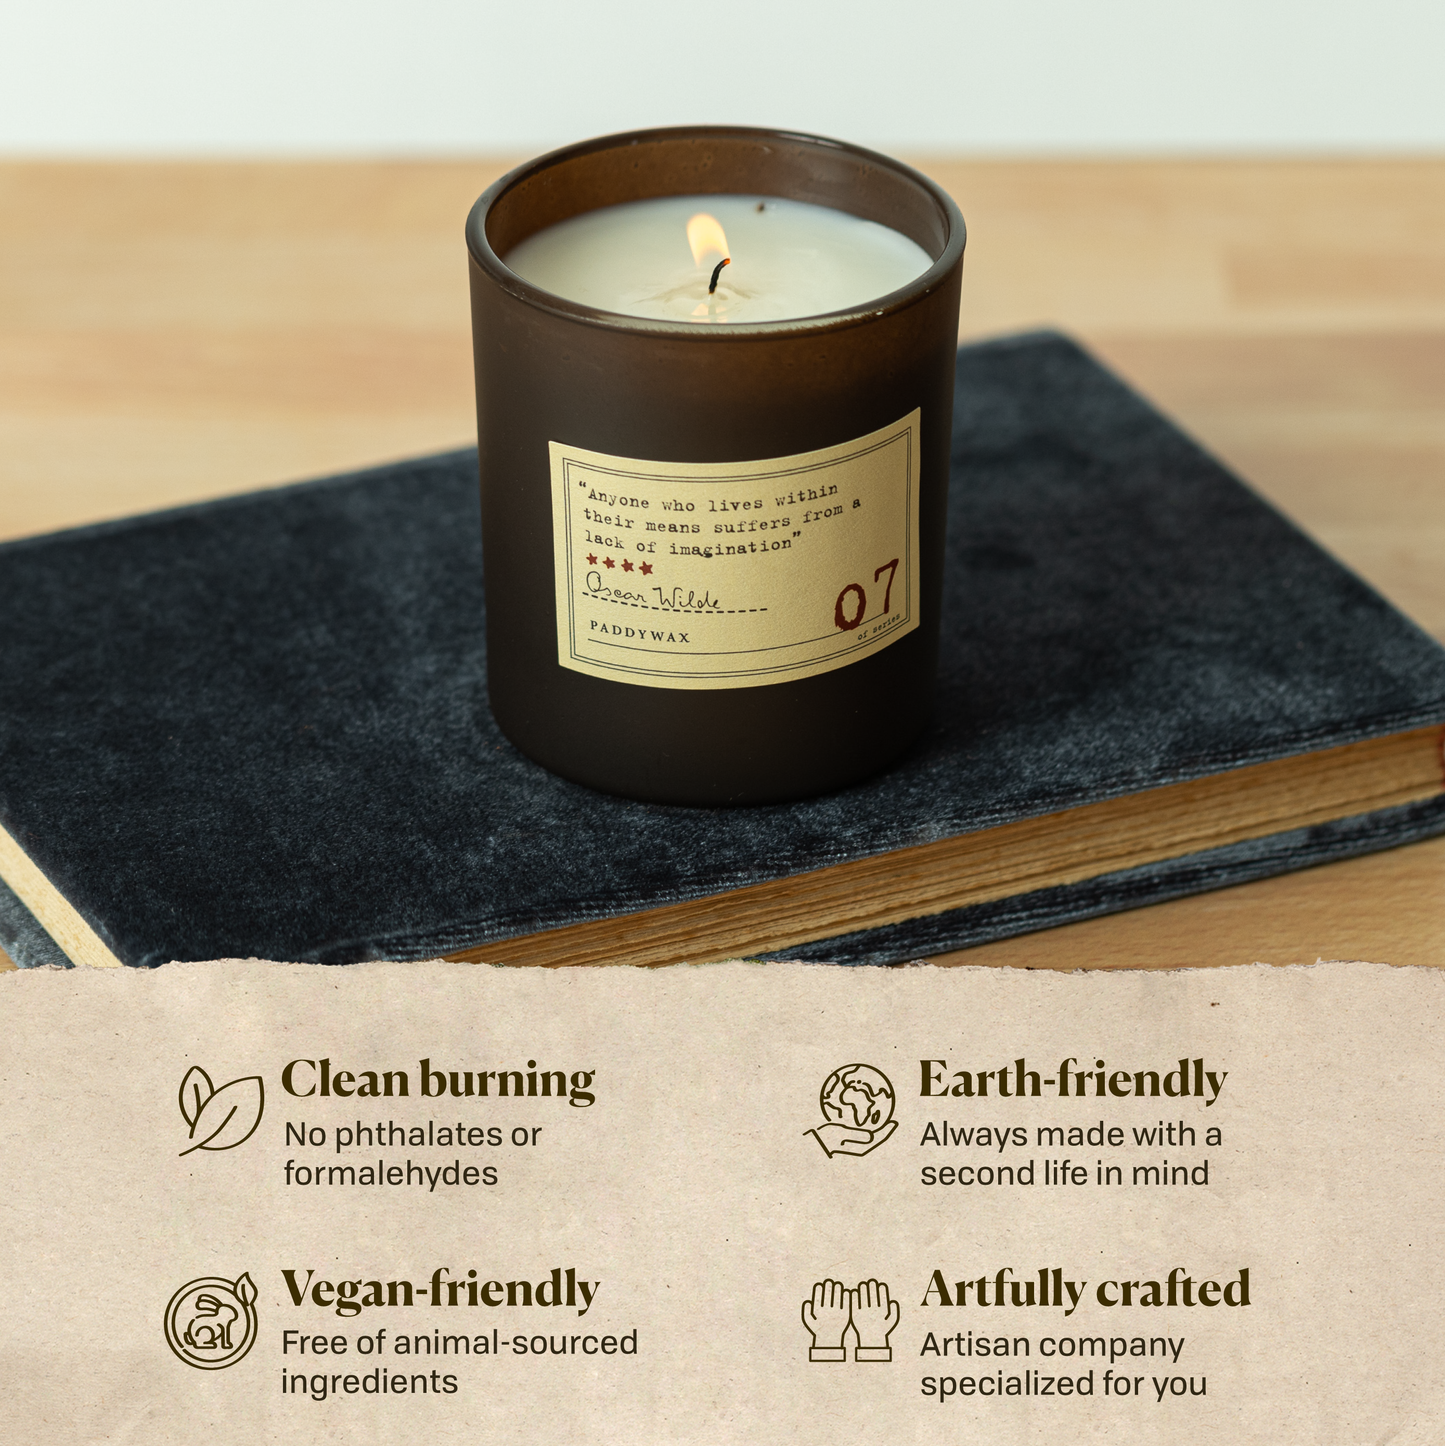 A photo of the Oscar Wilde candle sitting on a book. Clean burning: no phthalates or formaldehydes. Earth-friendly: Always made with a second life in mind. Vegan-friendly: Free of animal sourced ingredients. Artfully crafted: Artisan company specialized for you.